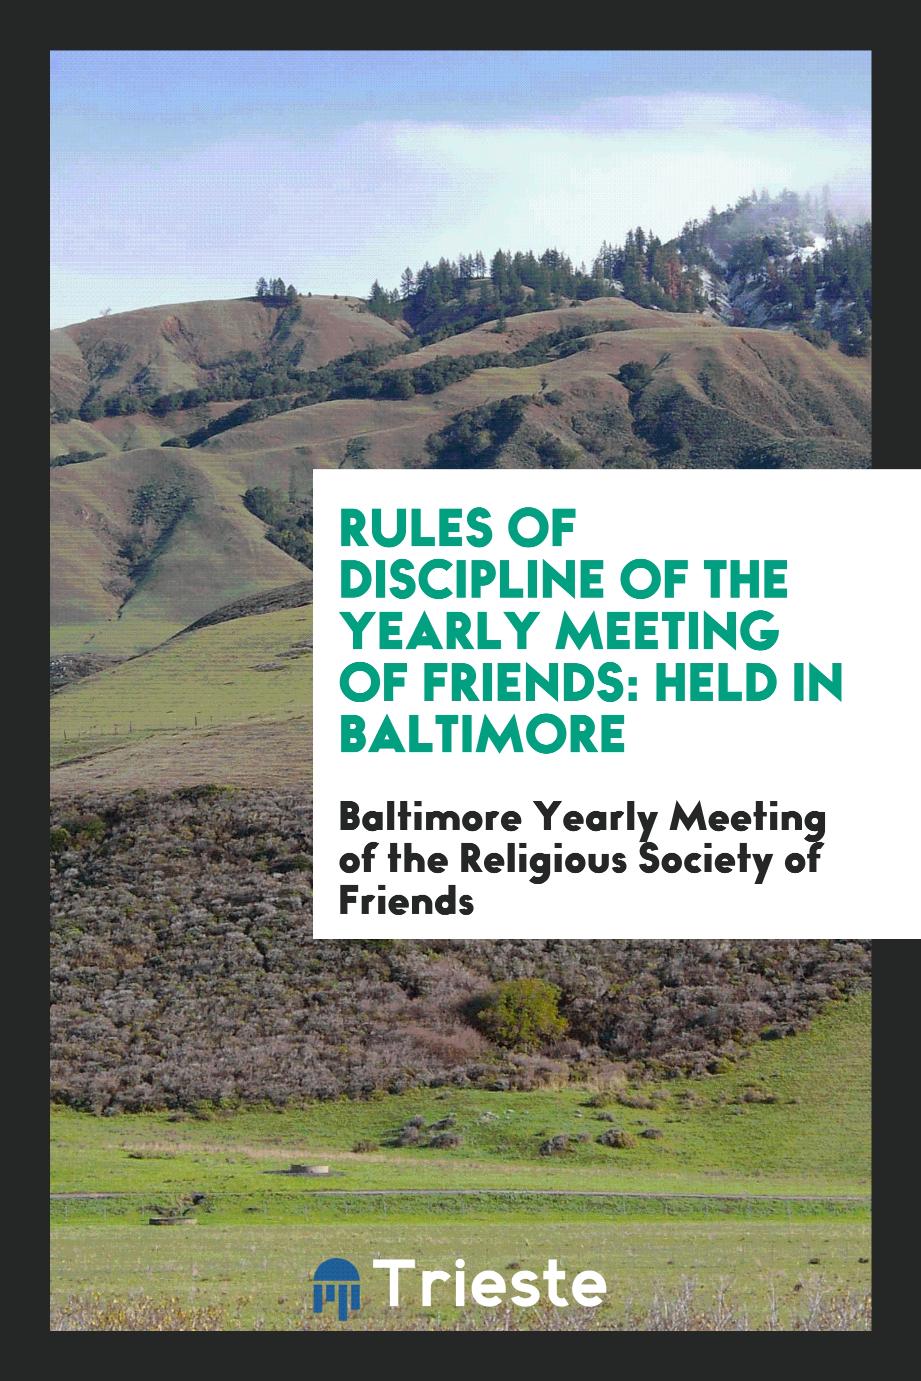 Rules of Discipline of the Yearly Meeting of Friends: Held in Baltimore